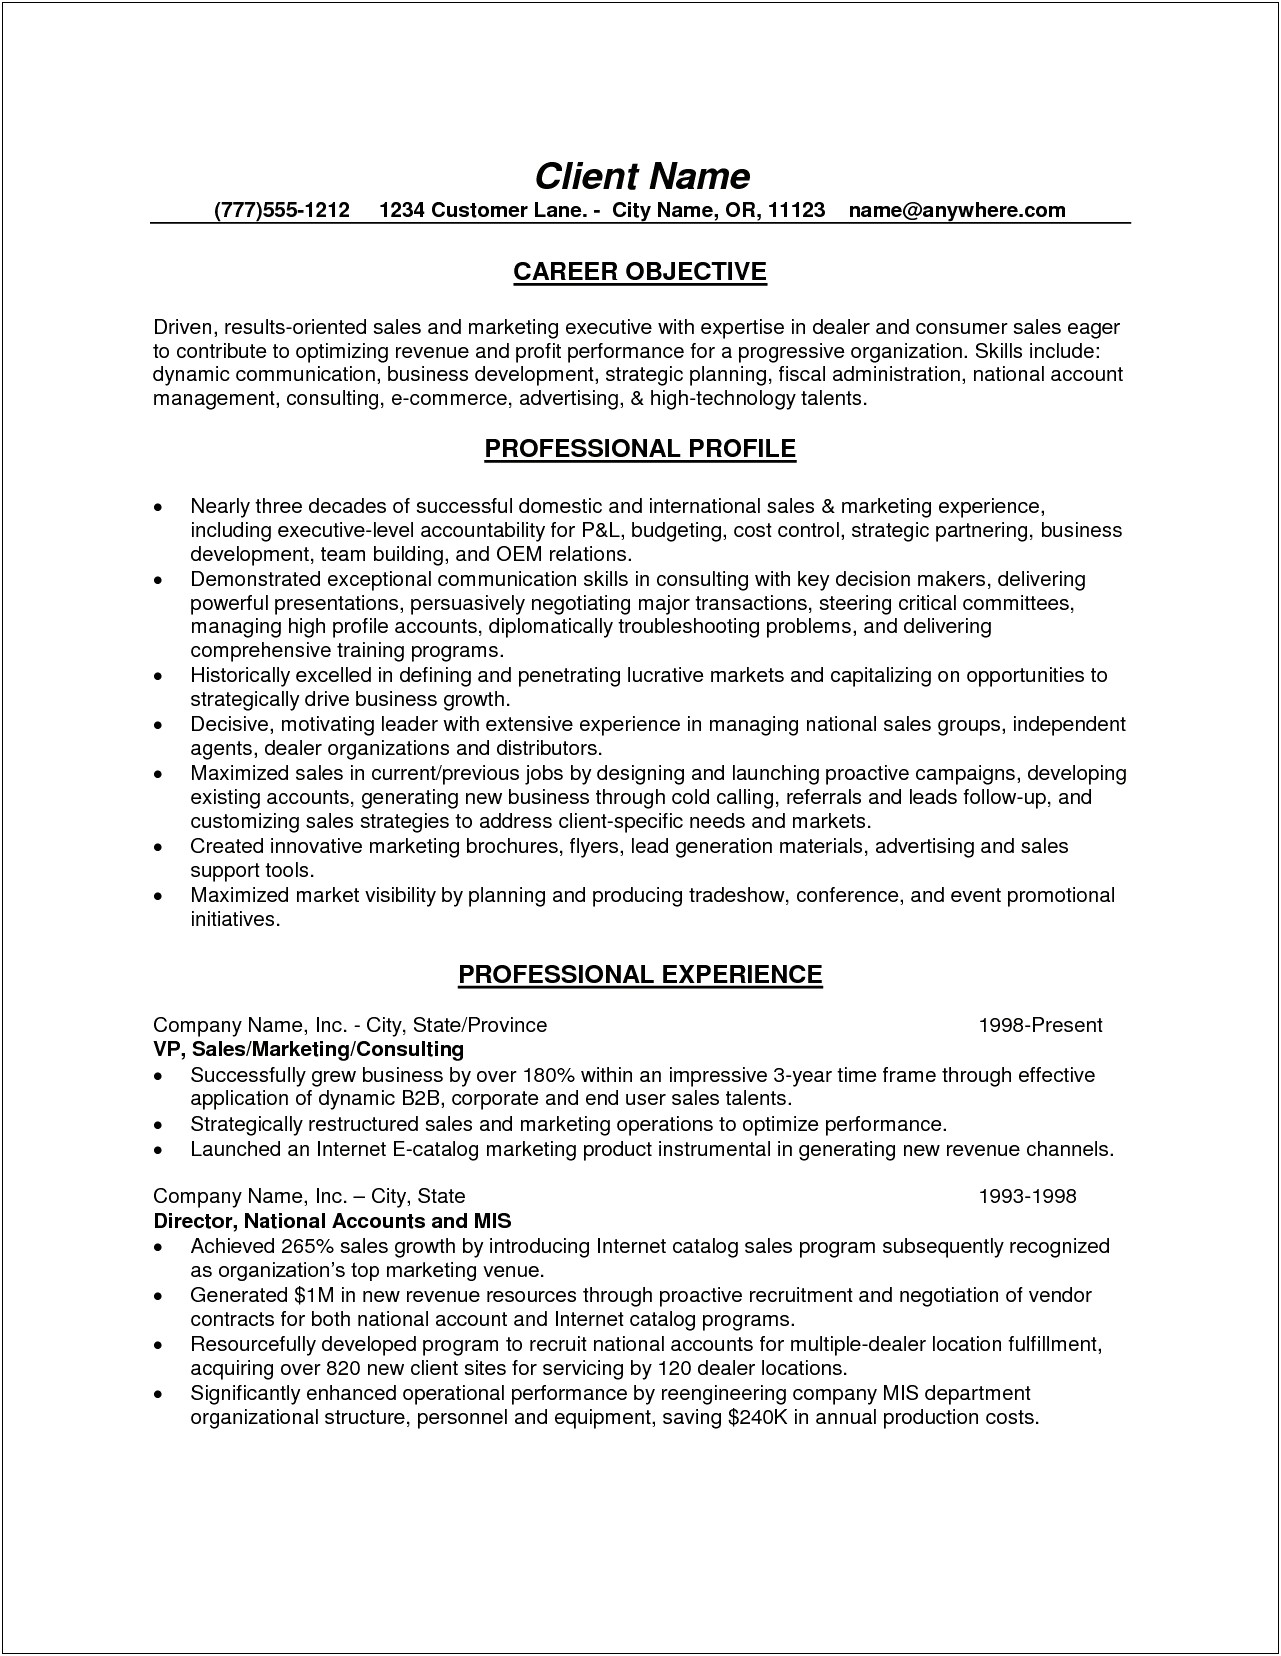 Should A Retail Resume Have An Objective Statement